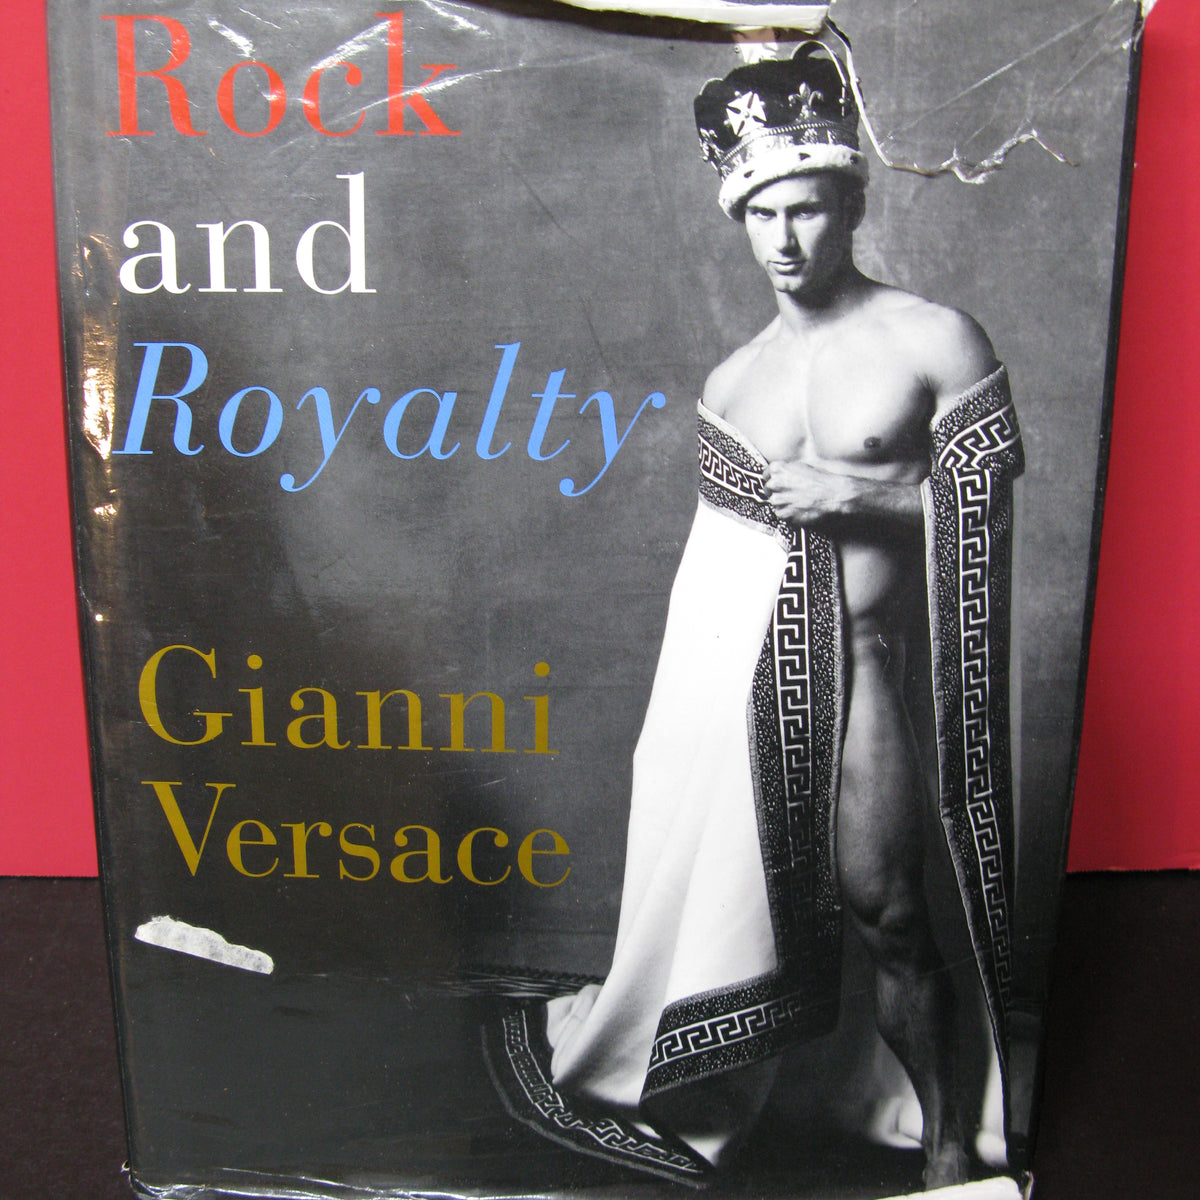 Rock and Royalty - Gianni Versace